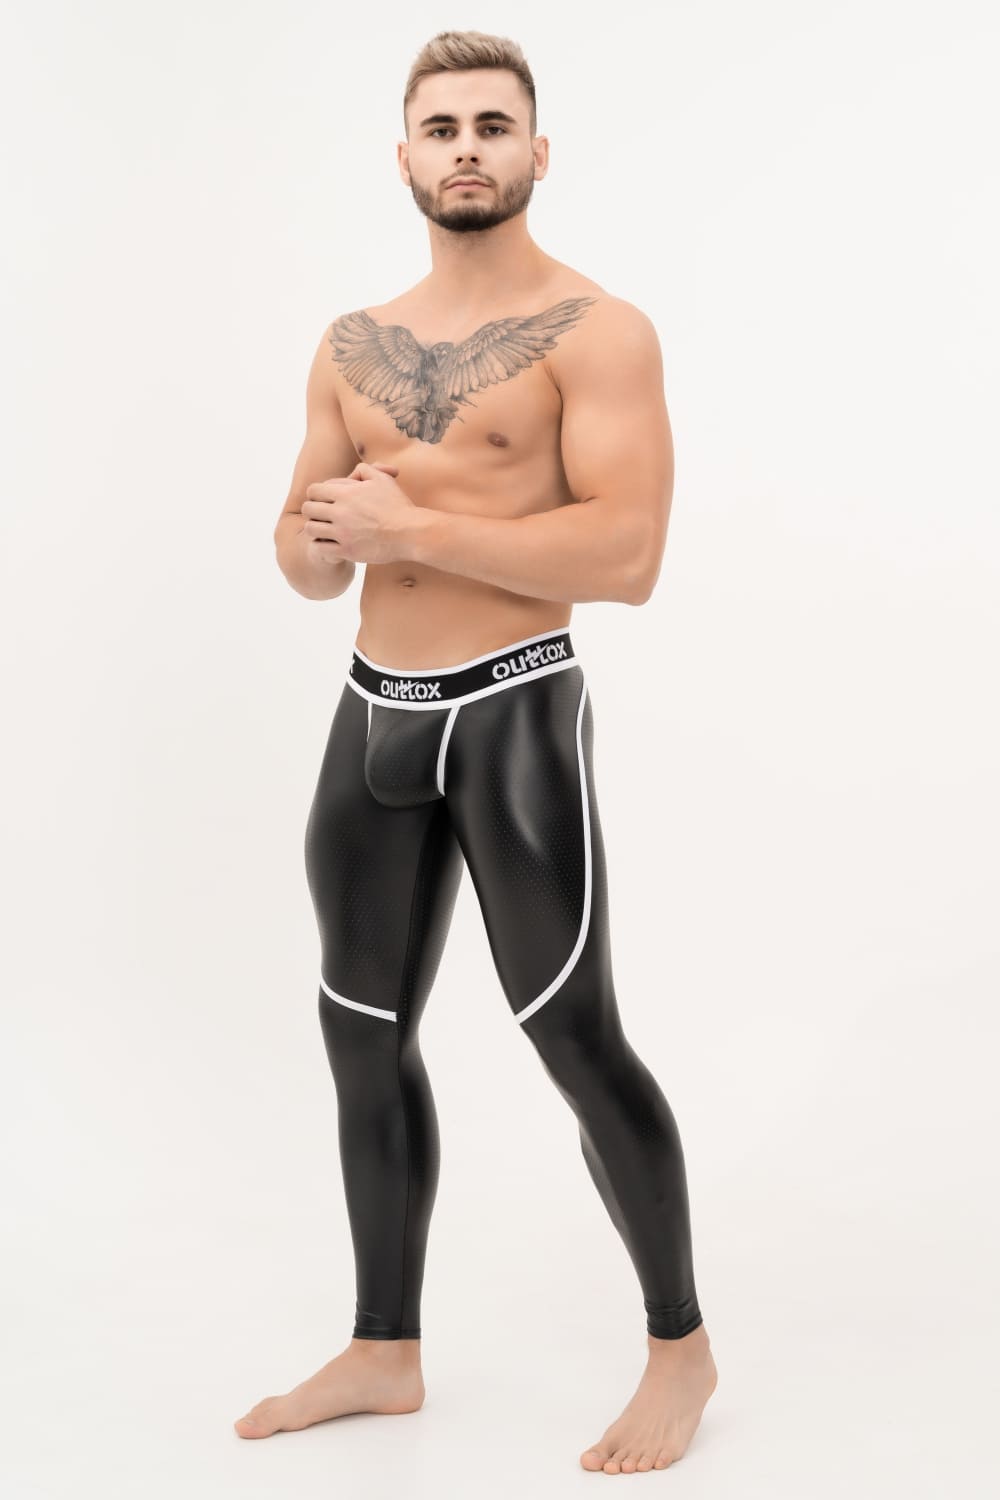 Outtox. Zip-Rear Leggings with Snap Codpiece. Black+White